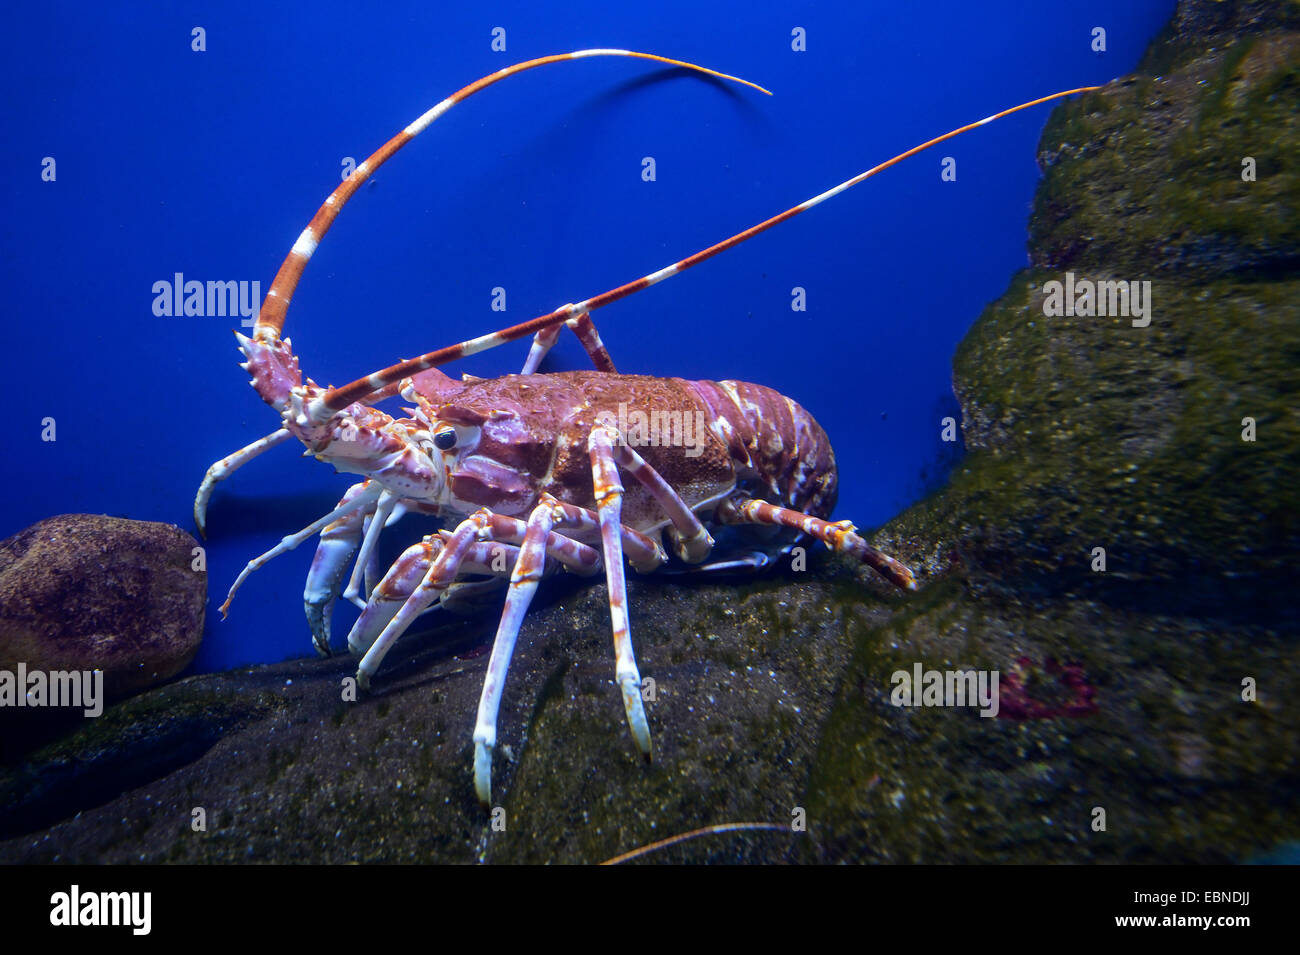 Southern Spiny Lobster (Palinurus gilchristi), on a rock in the sea, South Africa, Western Cape Stock Photo